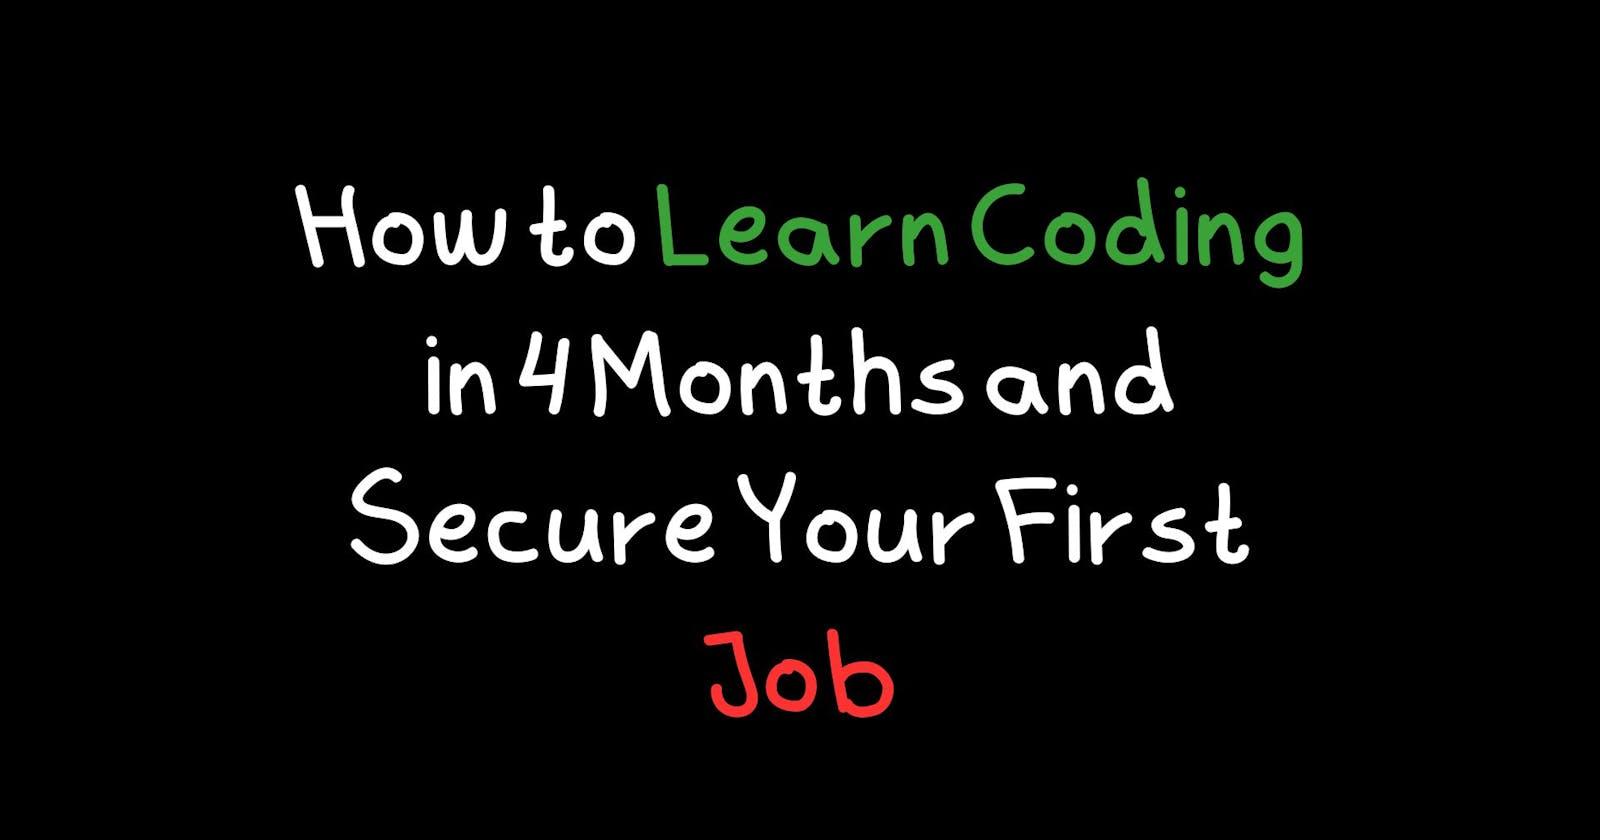 How to Learn Coding in 4 Months and Secure Your First Job